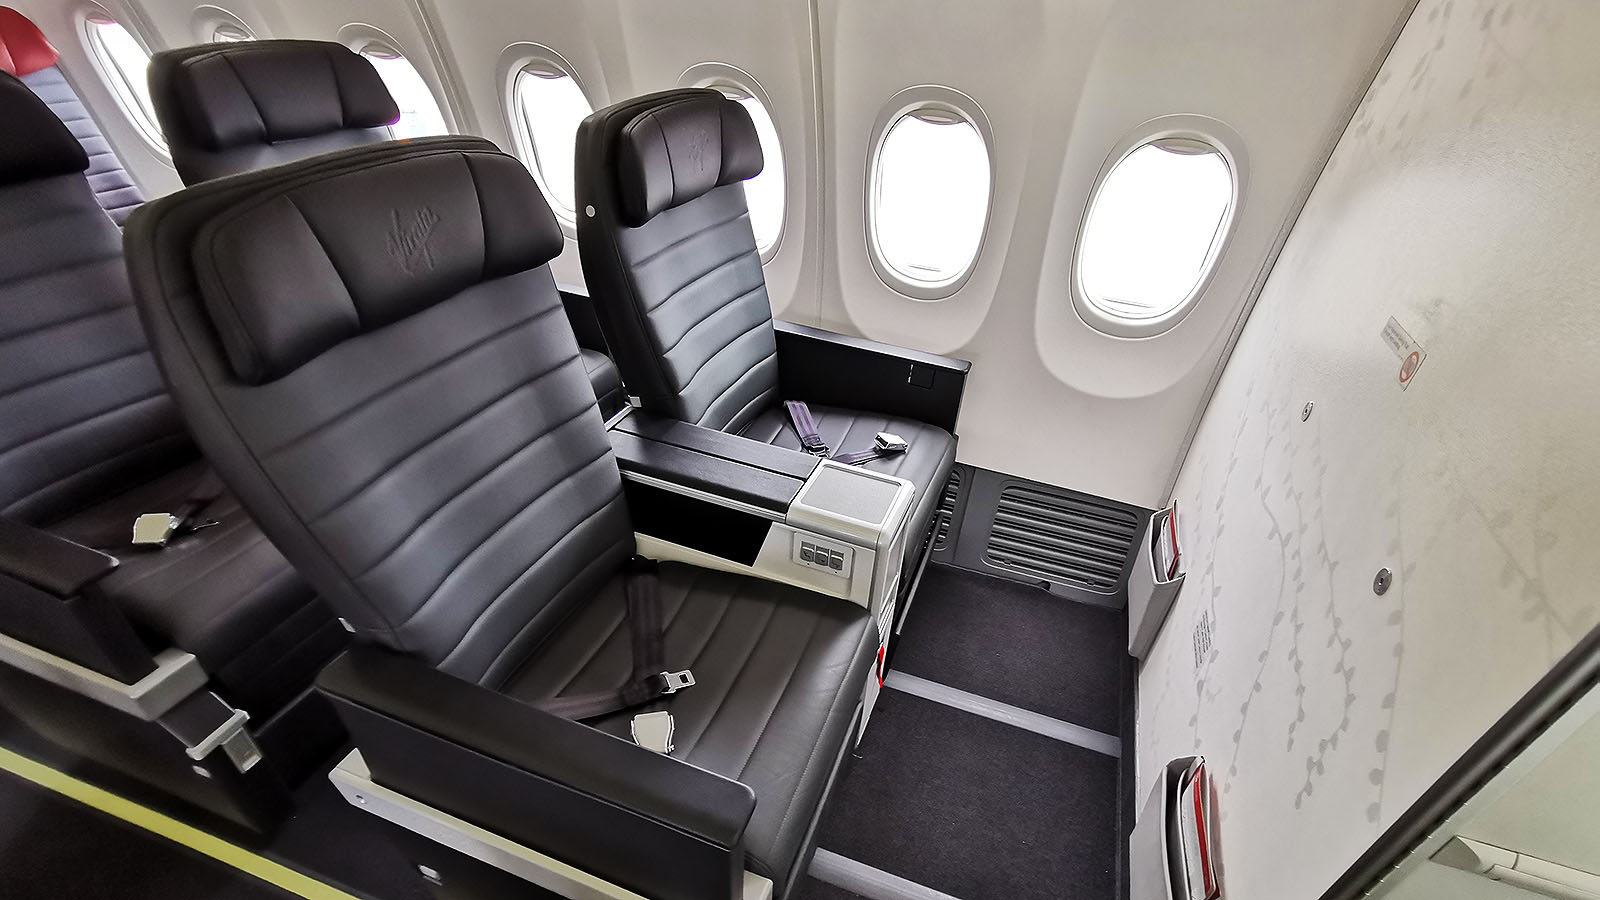 Business Class seating on the newest Virgin Australia Boeing 737 in the fleet